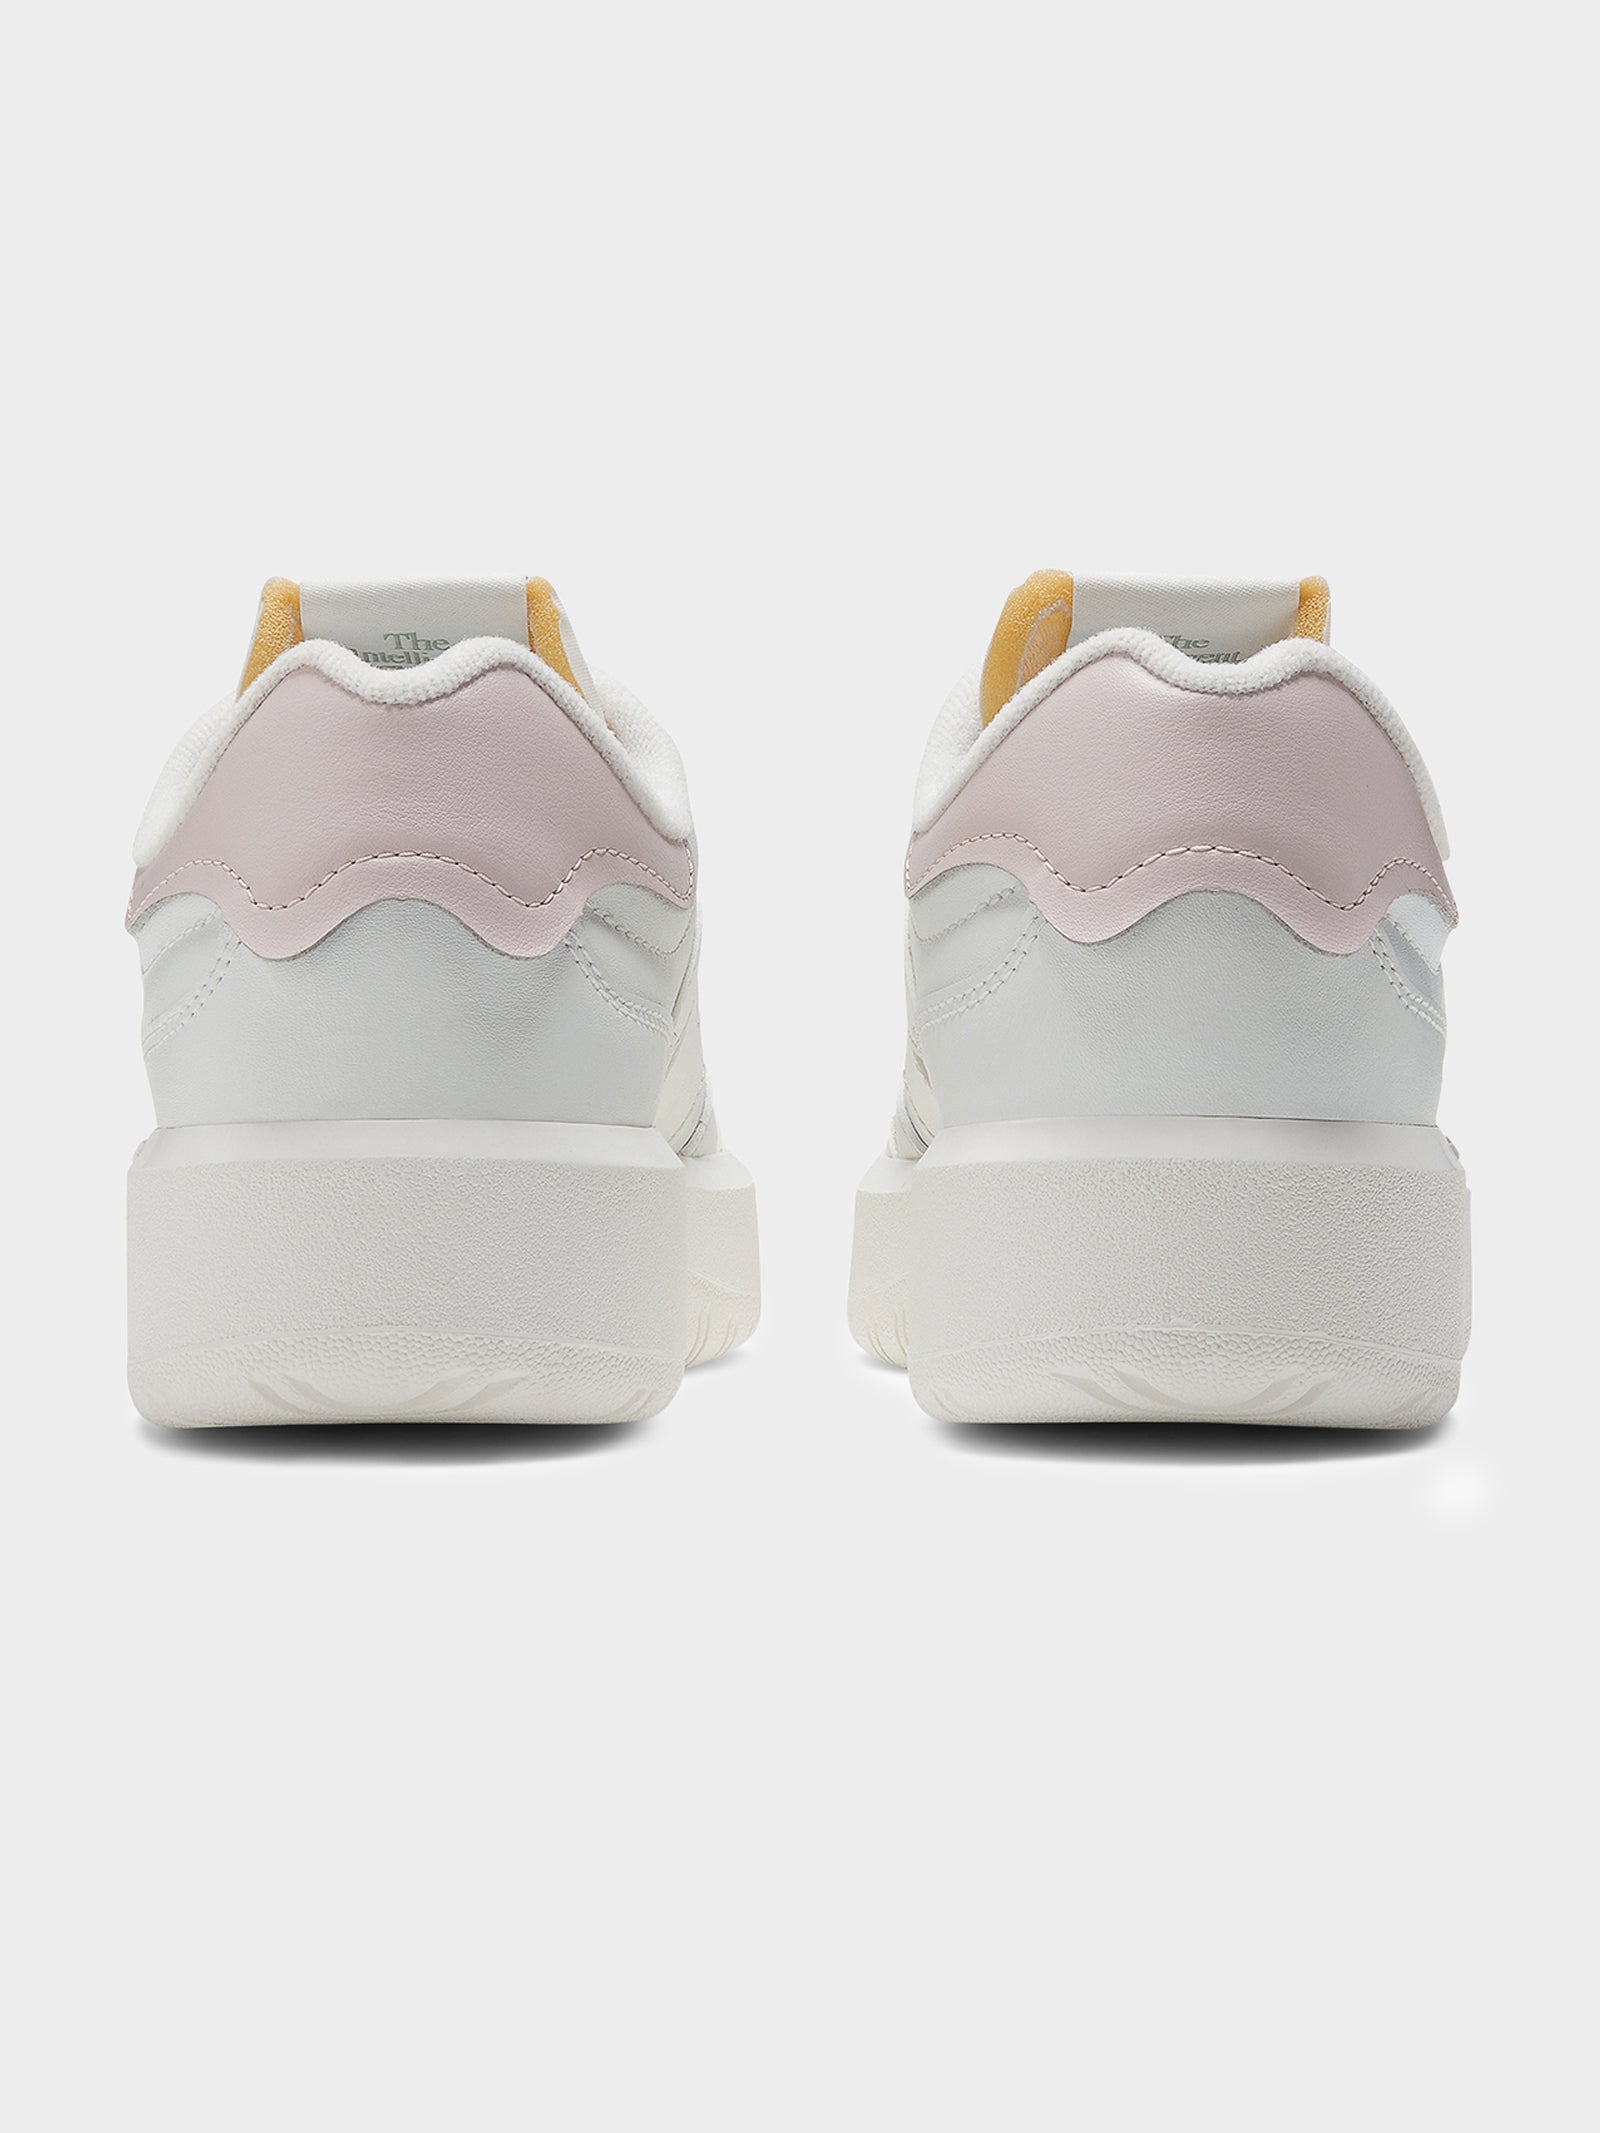 Unisex CT302 Sneakers in White, Stone Pink & Sage Leaf